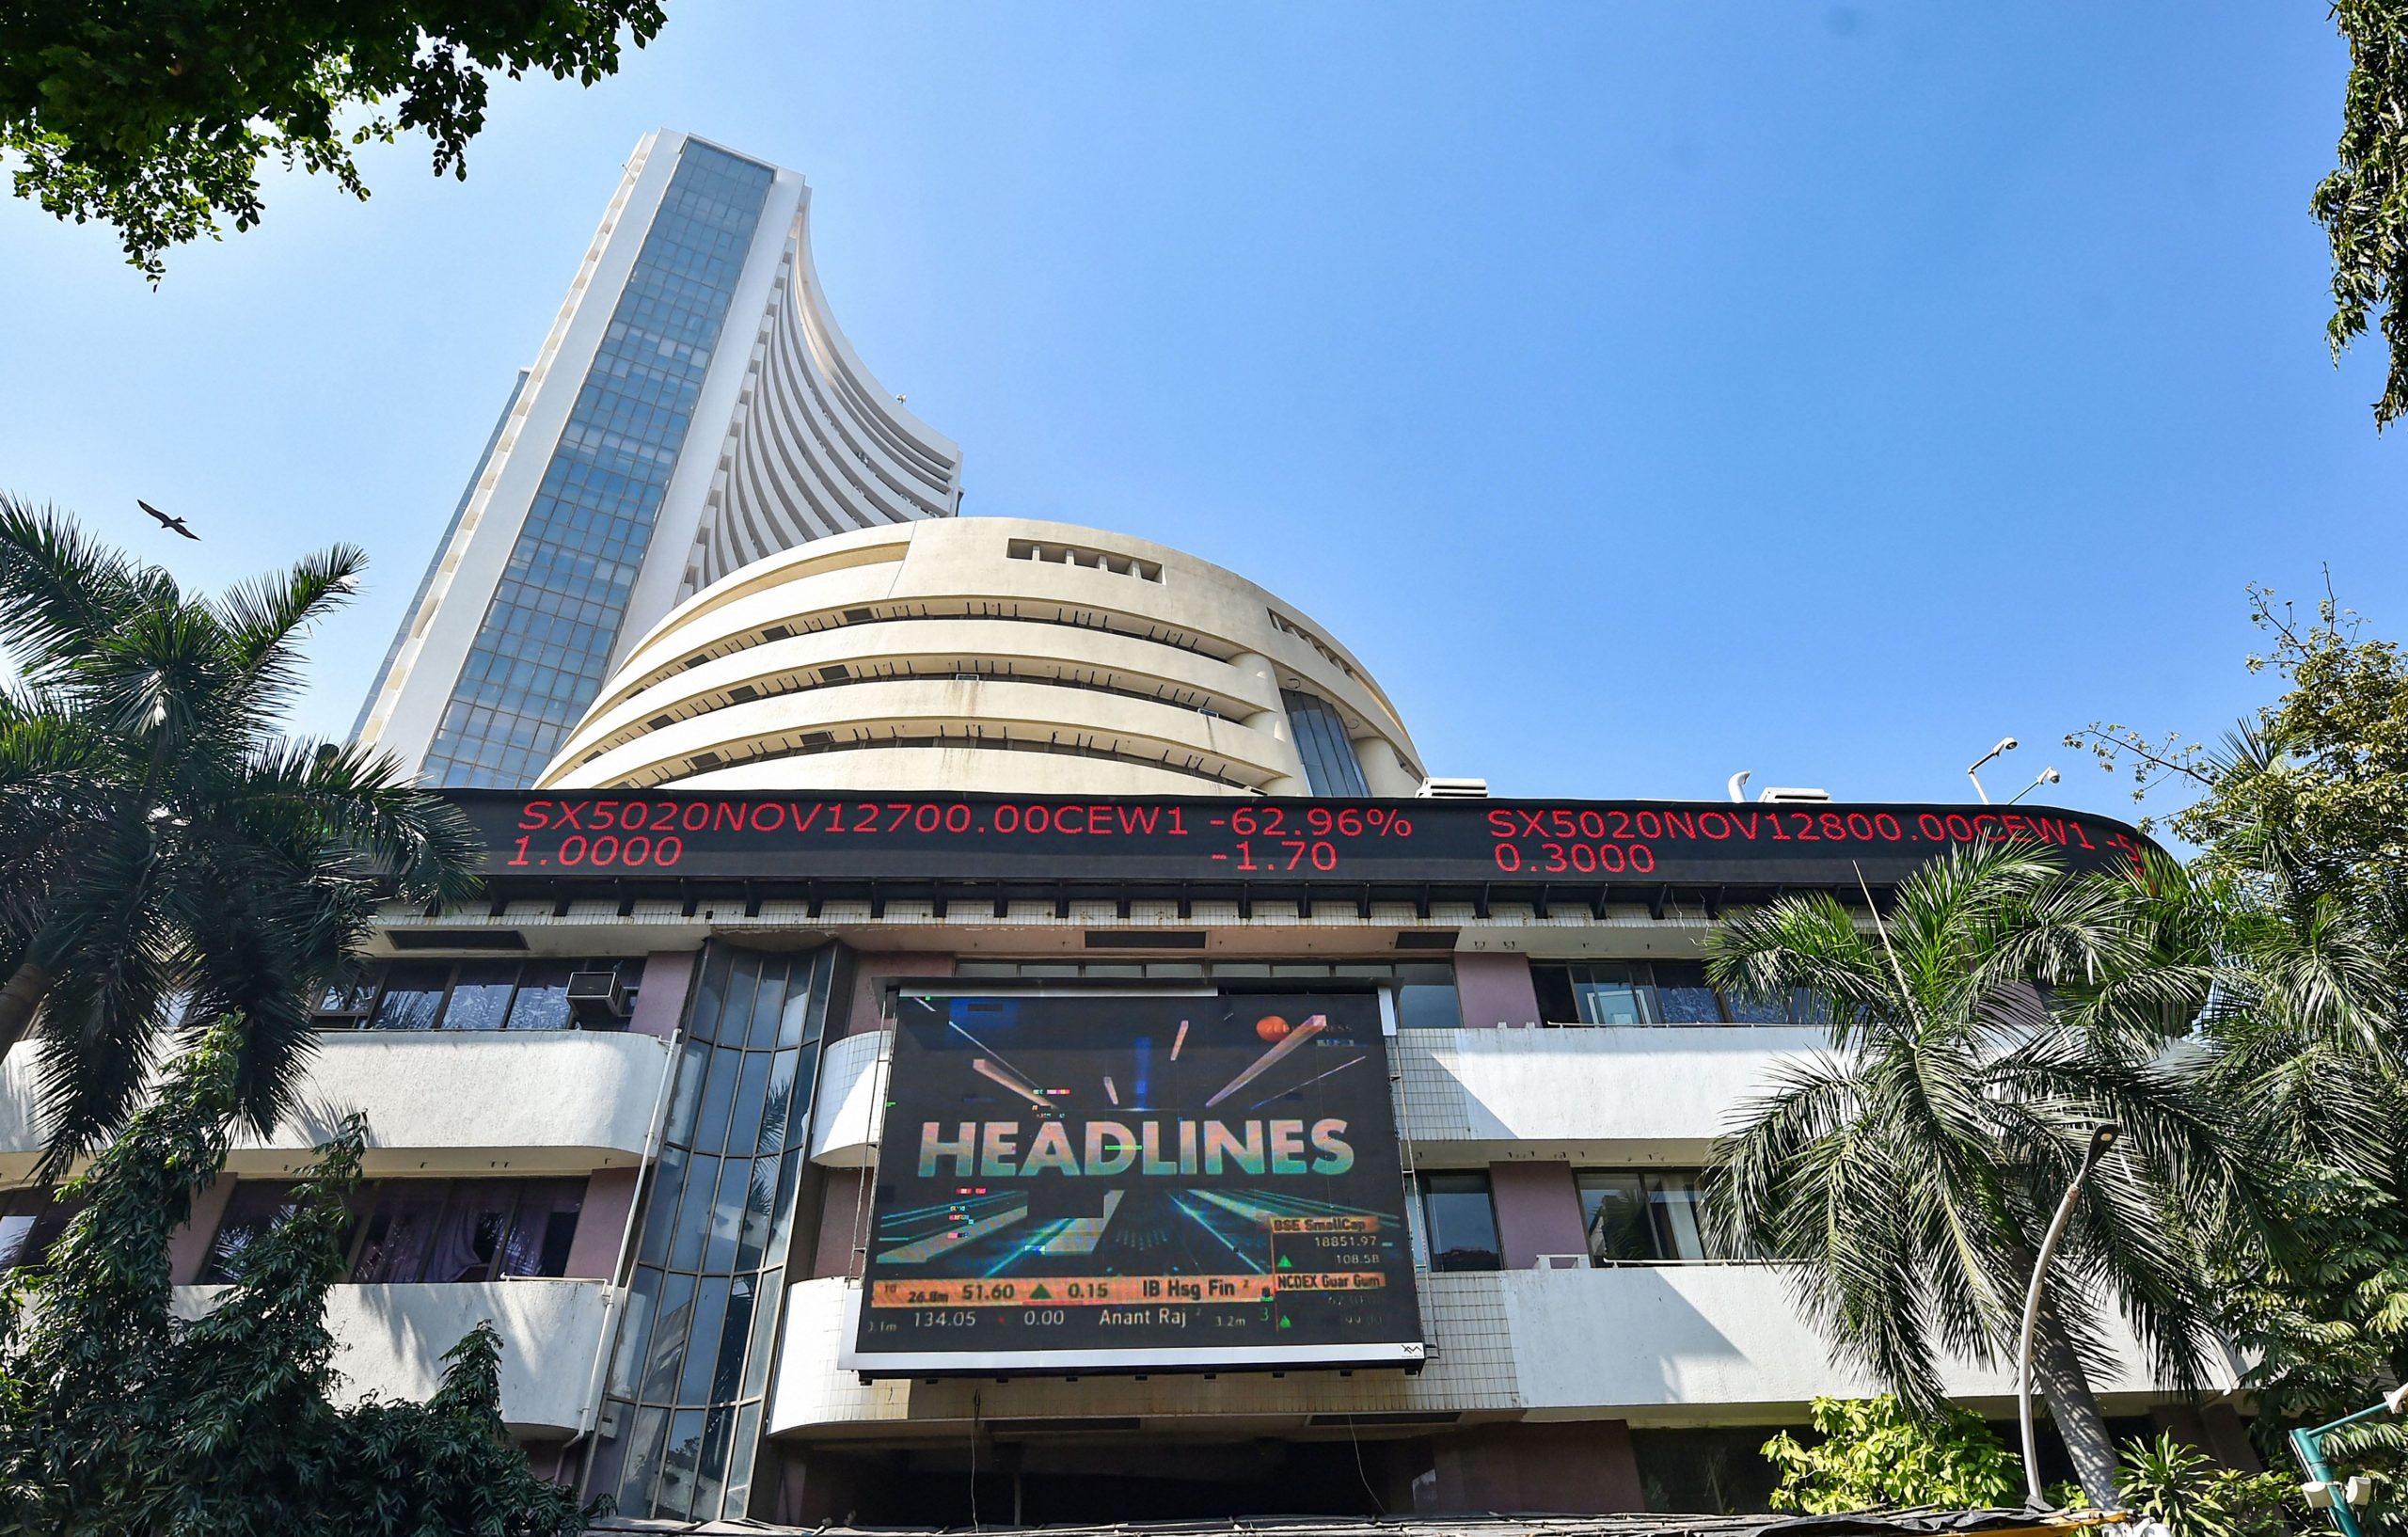 Trending Stocks: Reliance, Sail, Tata Steel and others in news today